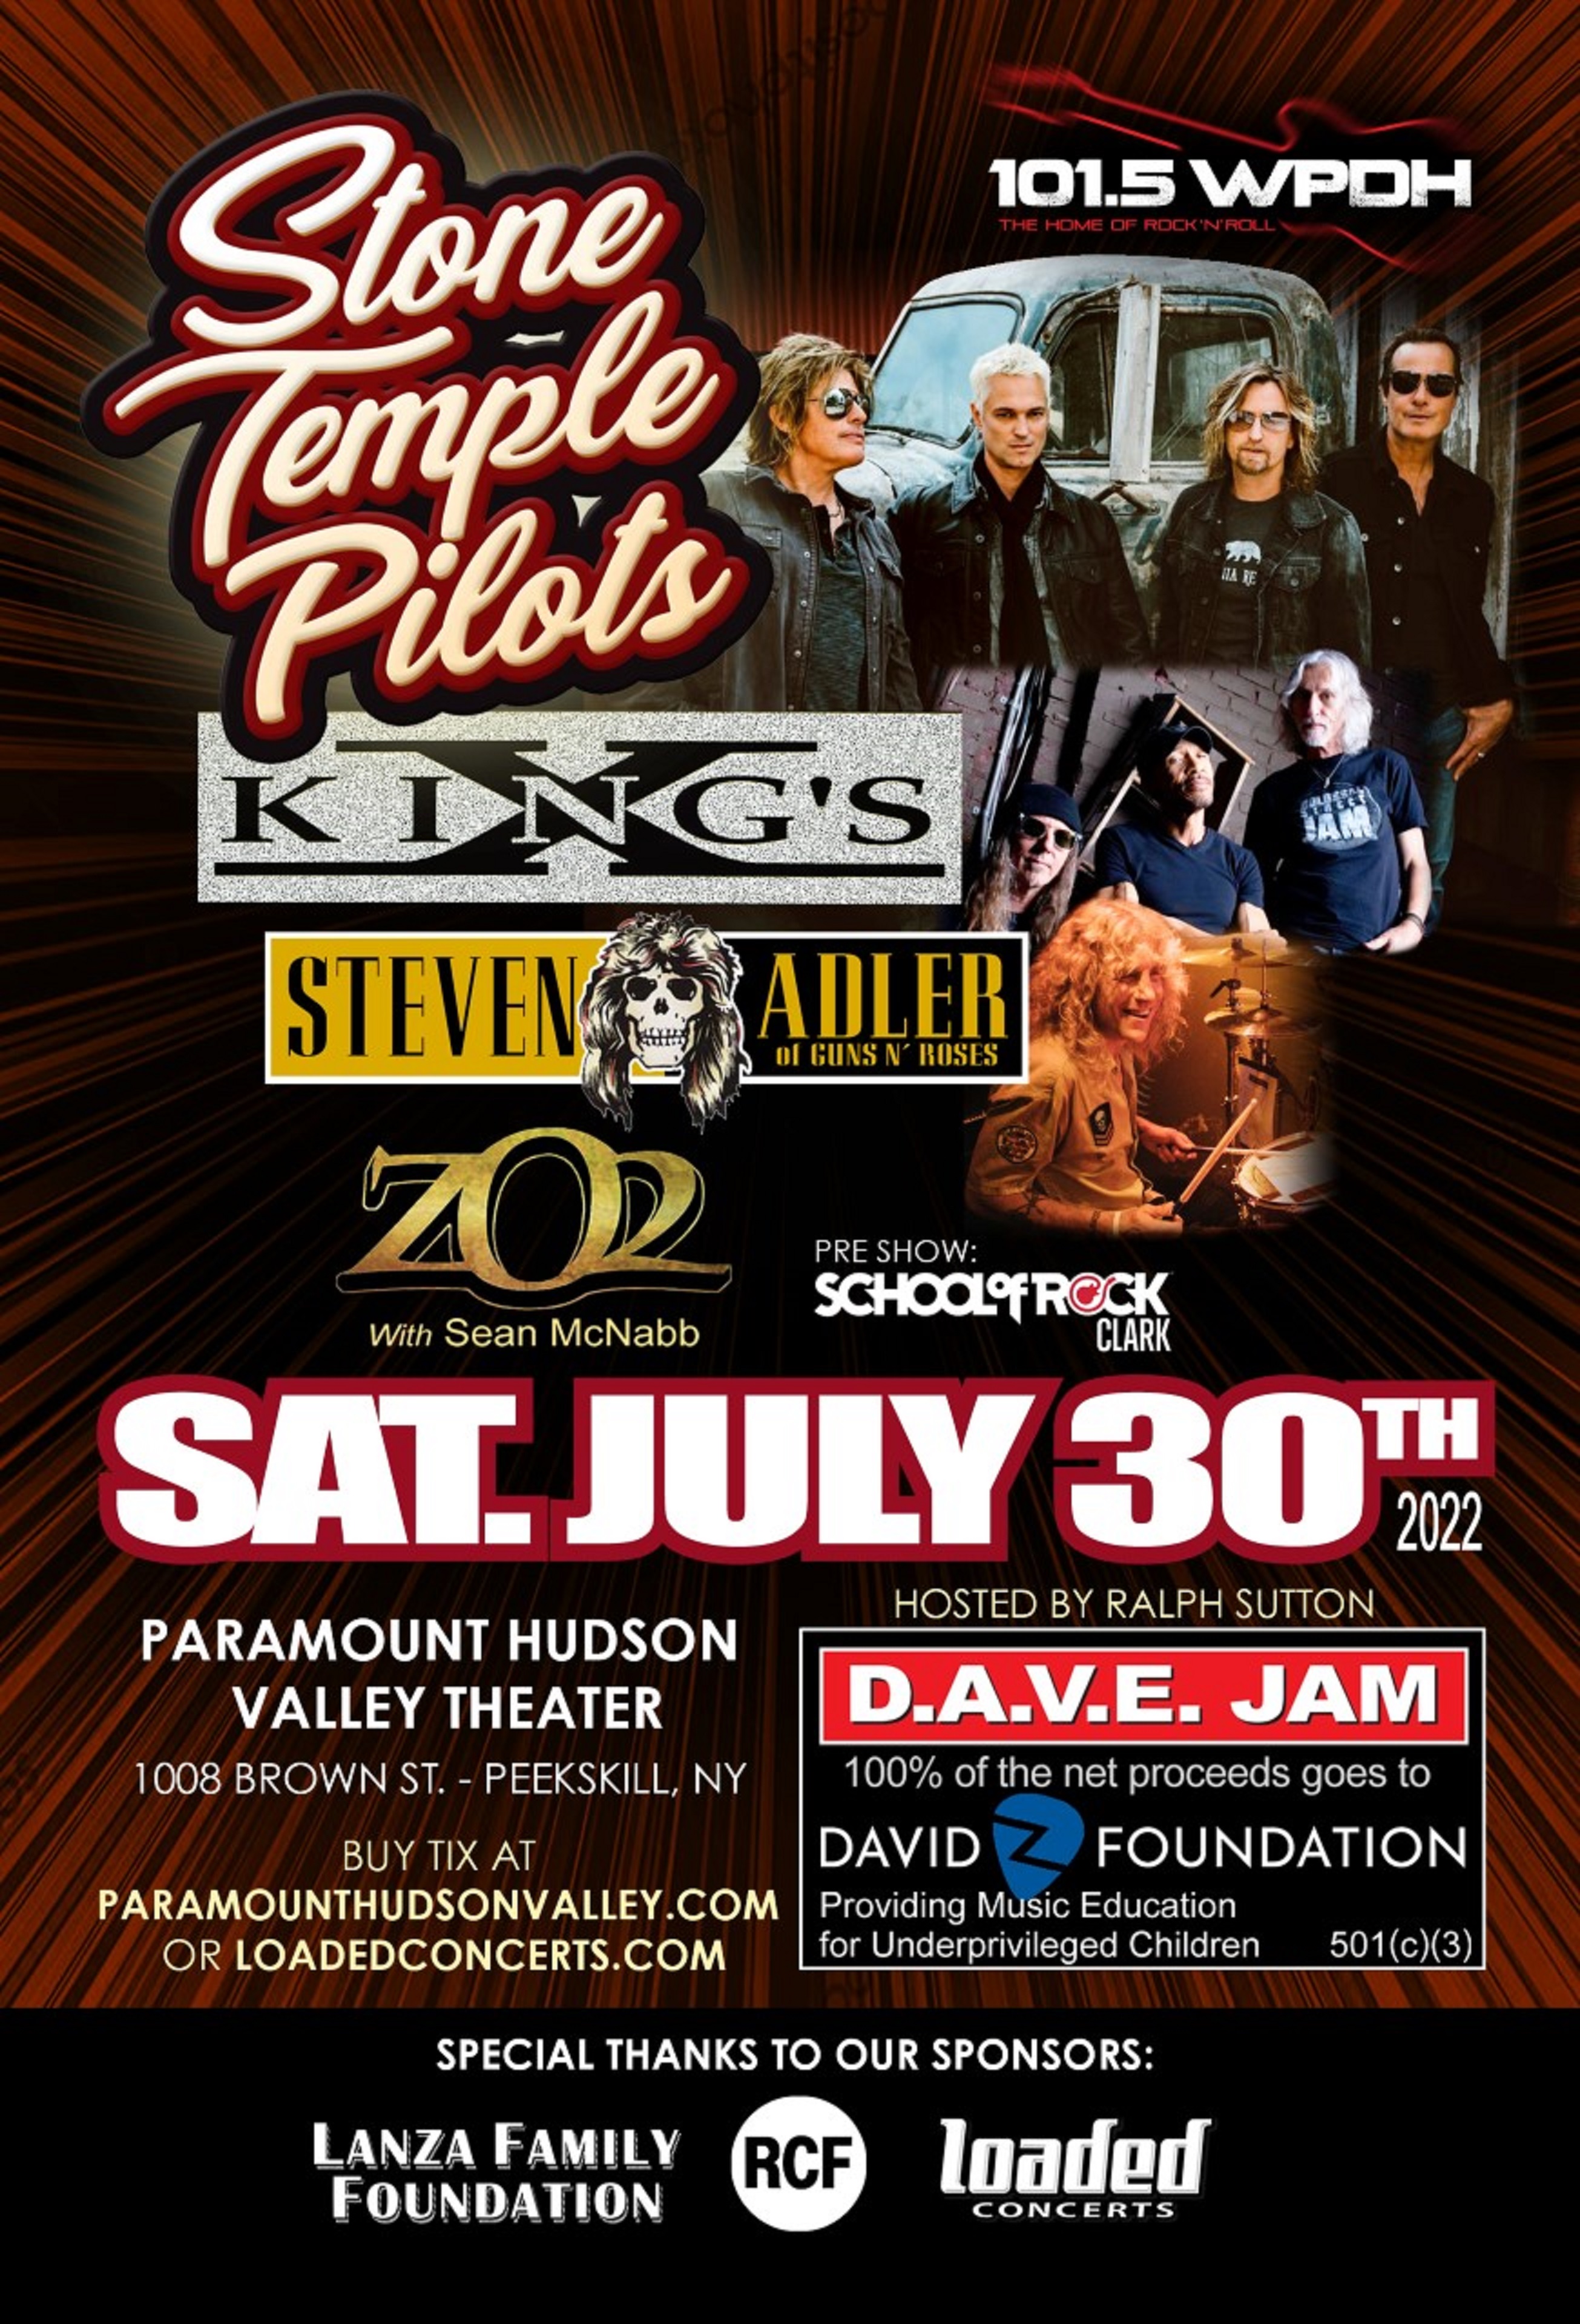 Stone Temple Pilots, King’s X, Steven Adler, And Zo2 To Perform At “D.A.V.E. Jam”: A Benefit At The Paramount Hudson Valley Theater To Support The David Z Foundation